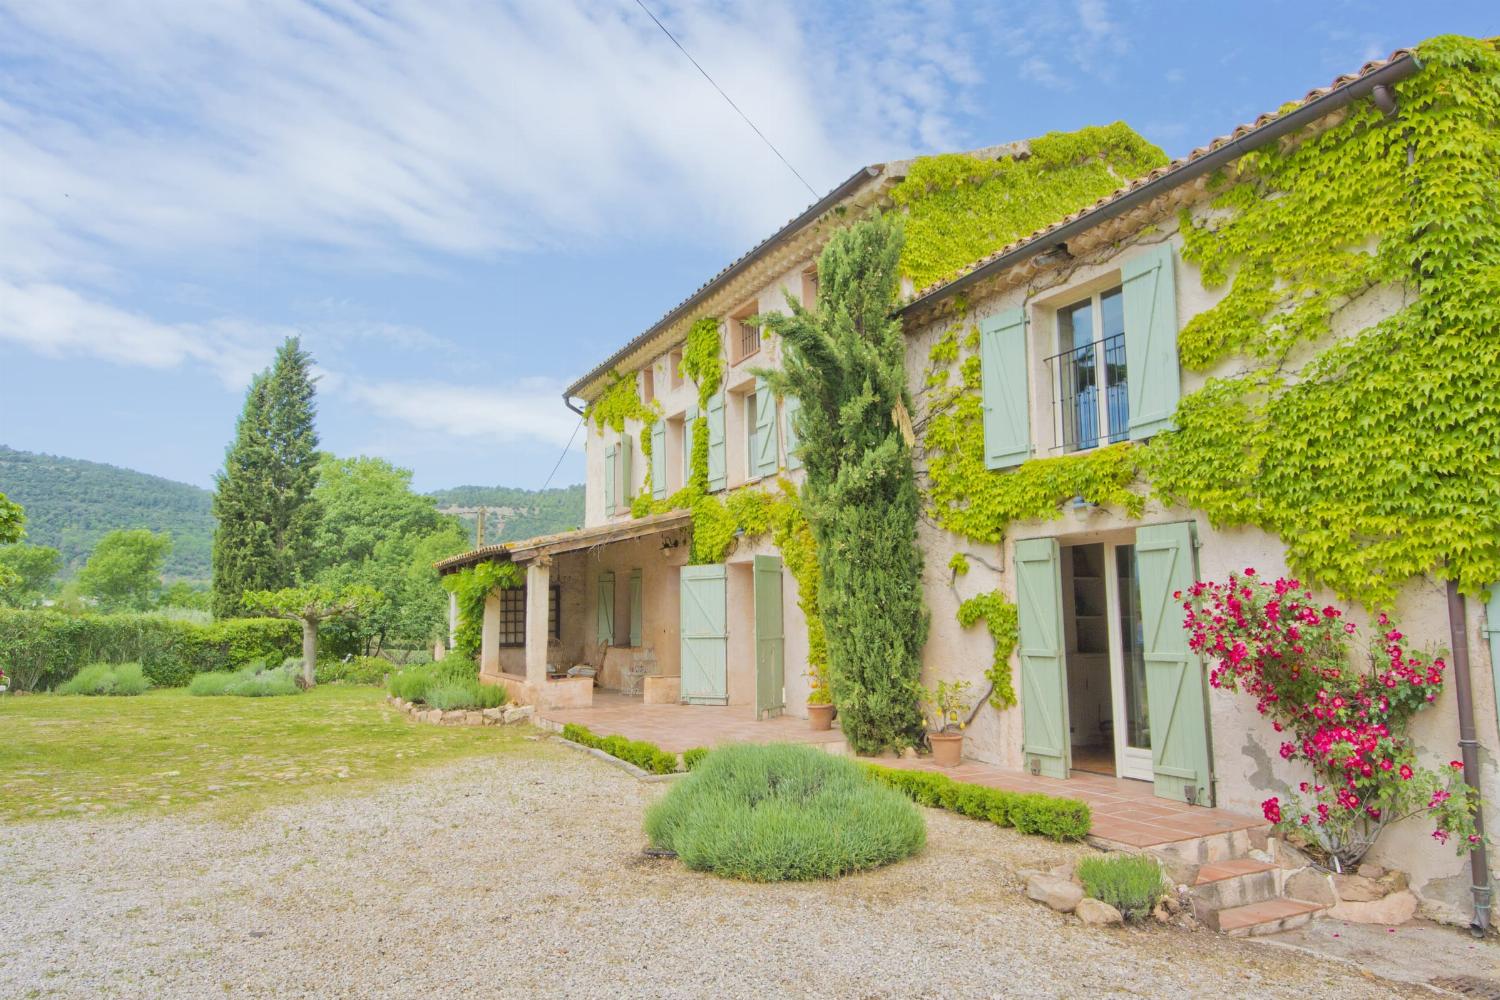 Rental home in Provence